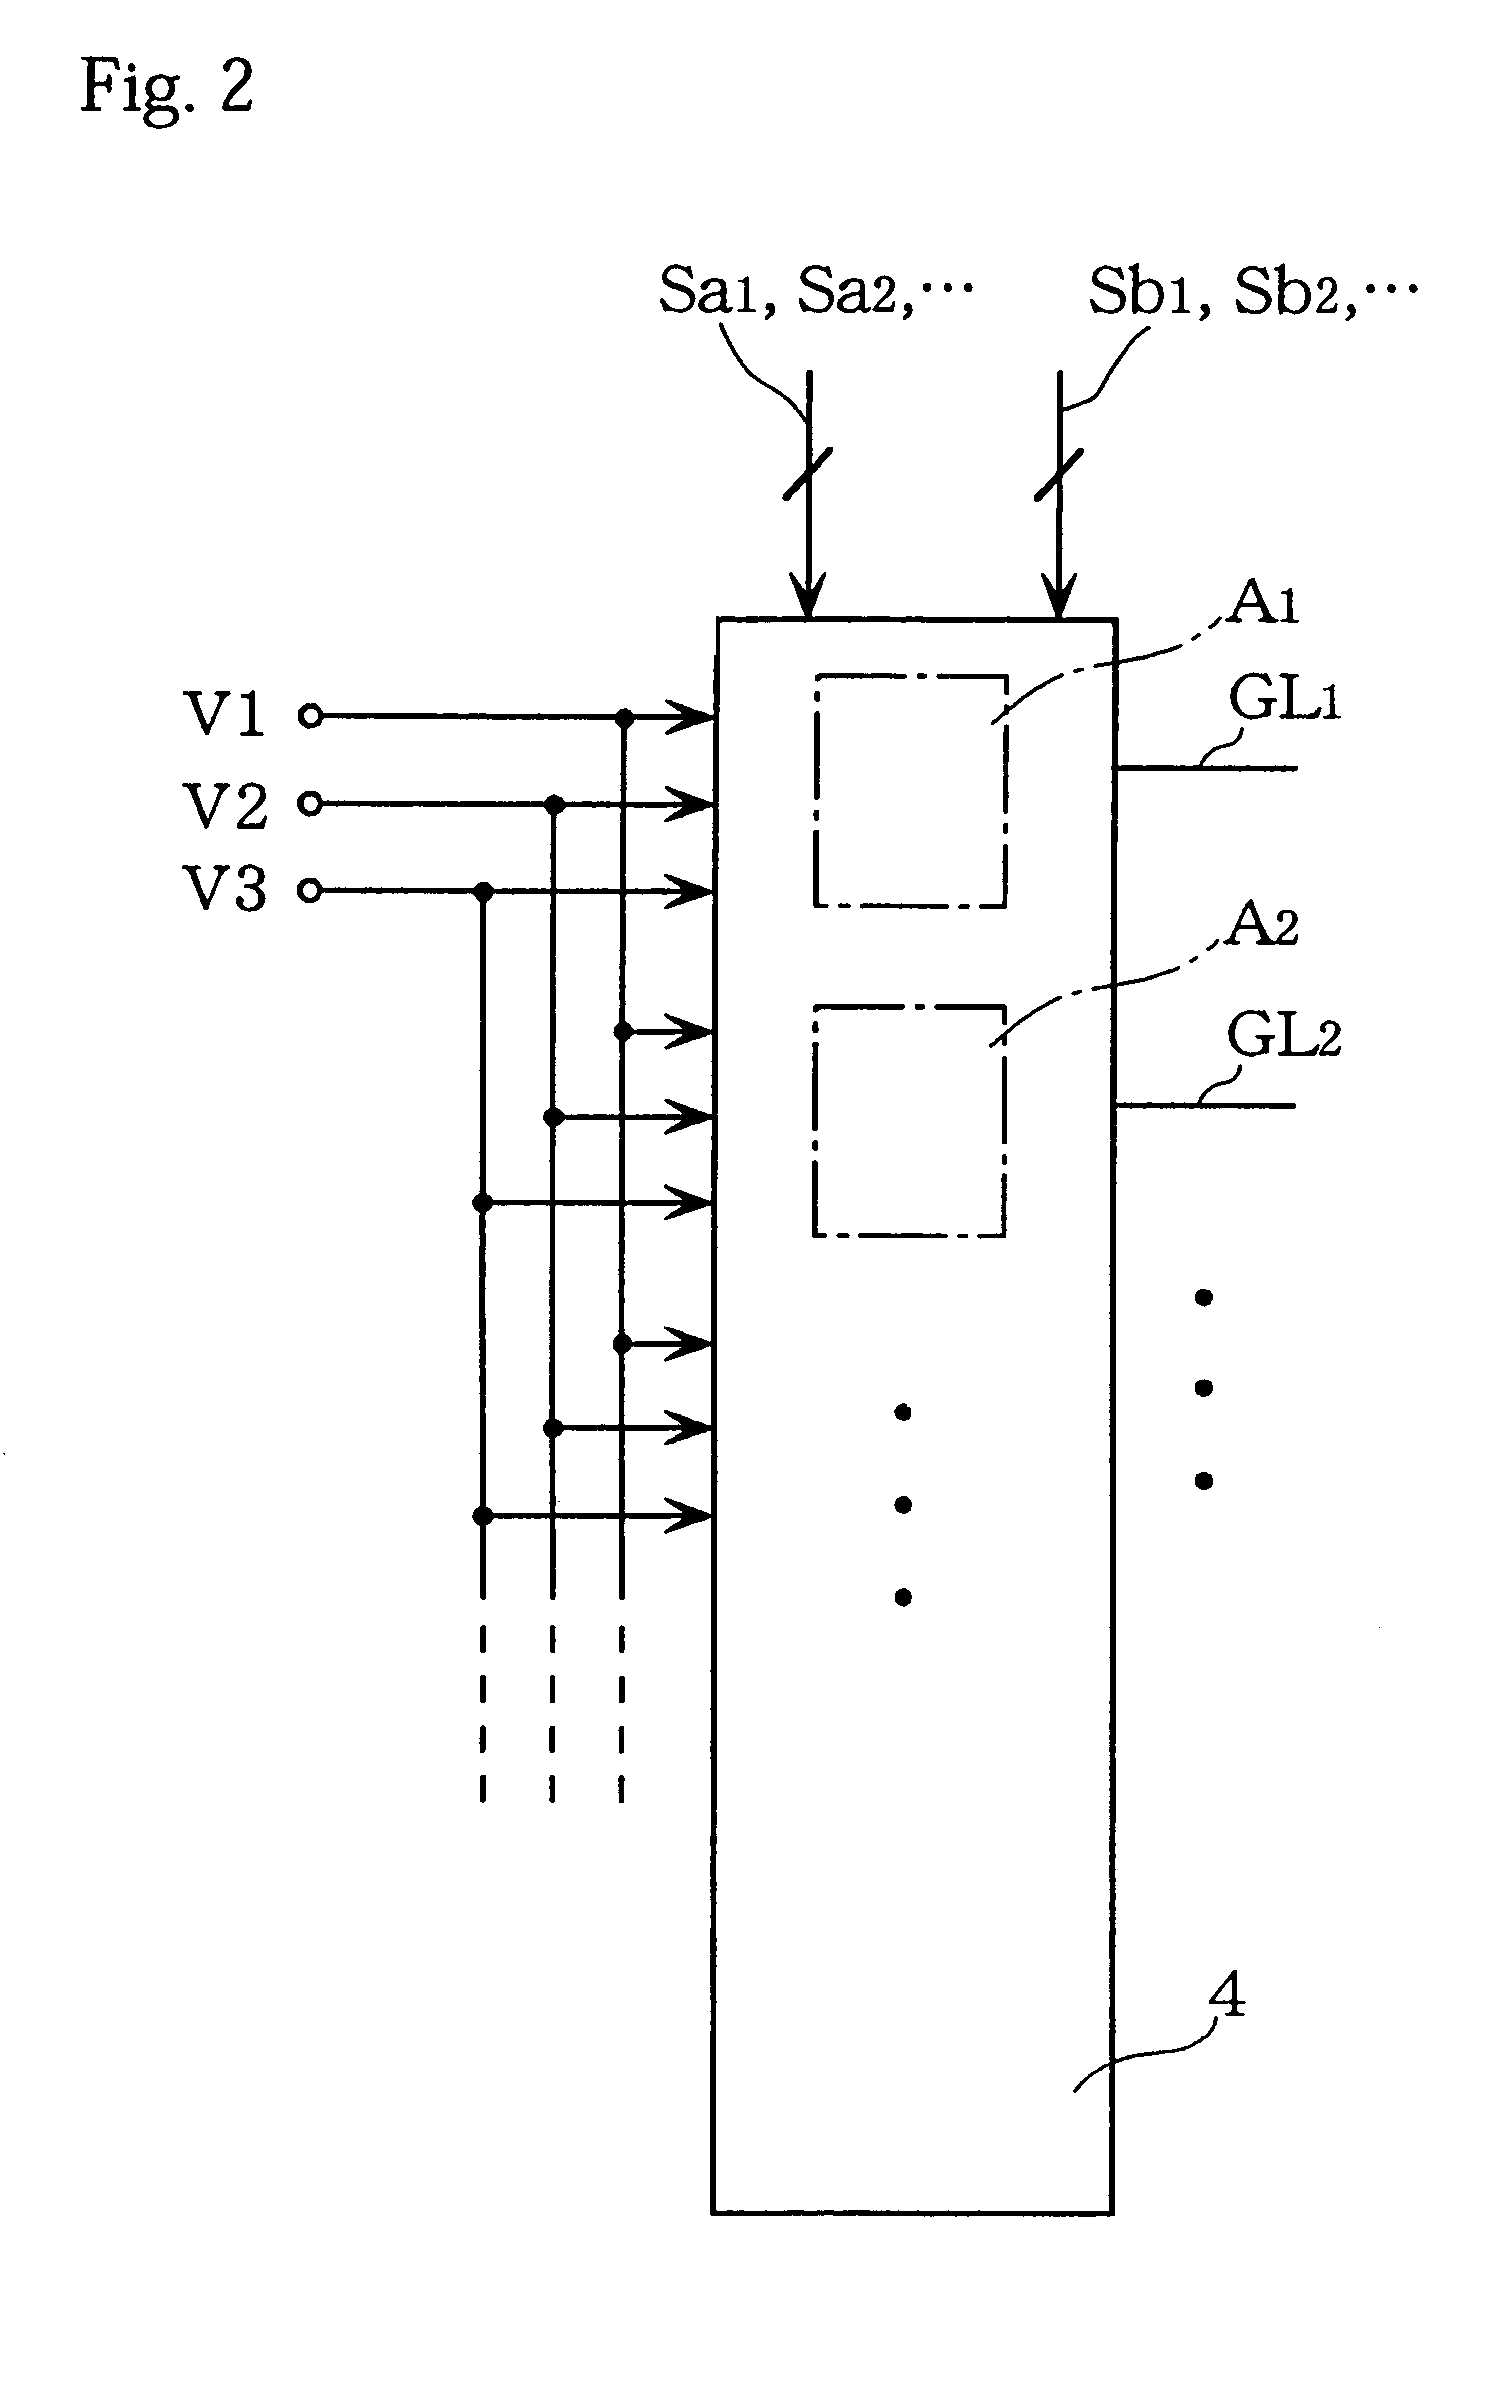 EL display device providing means for delivery of blanking signals to pixel elements